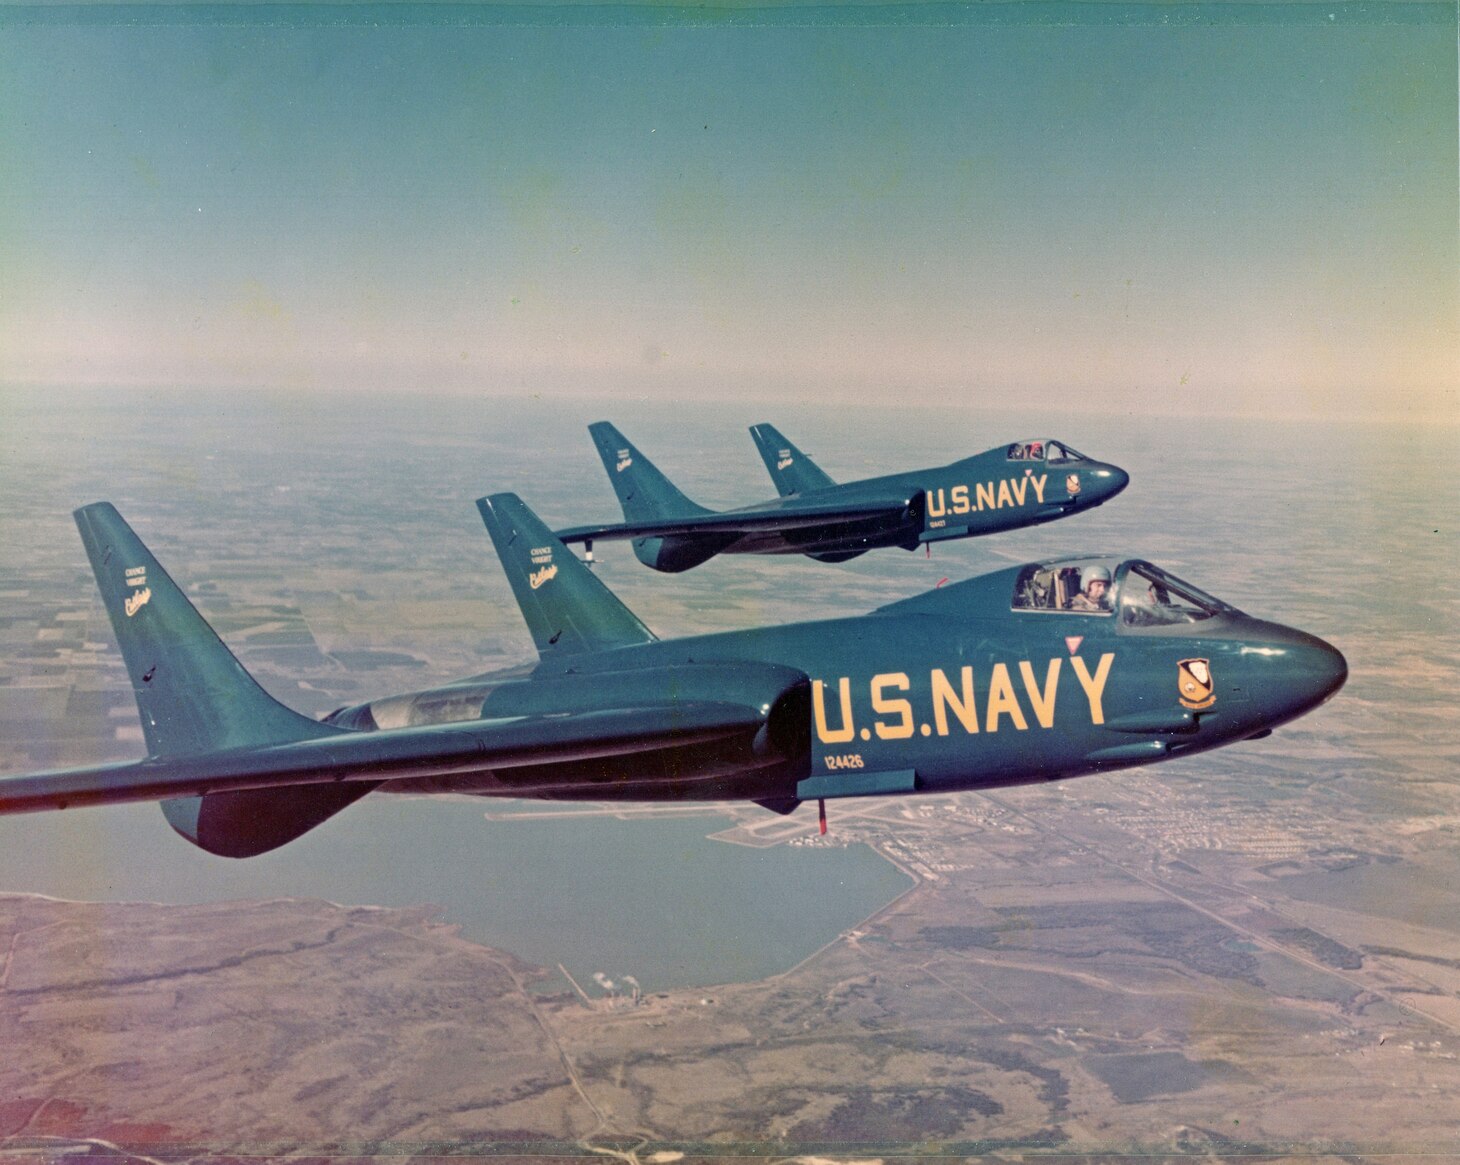 Only two men flew the F7U-1 Cutlass in Blue Angels colors, then-Lt. Cmdr. (later Rear Adm.) “Whitey” E.L. Feightner and Lt. Harding C. “Mac” Macknight. In this photo, Feightner flies the Cutlass in the foreground, with Macknight on his left wing in the background.